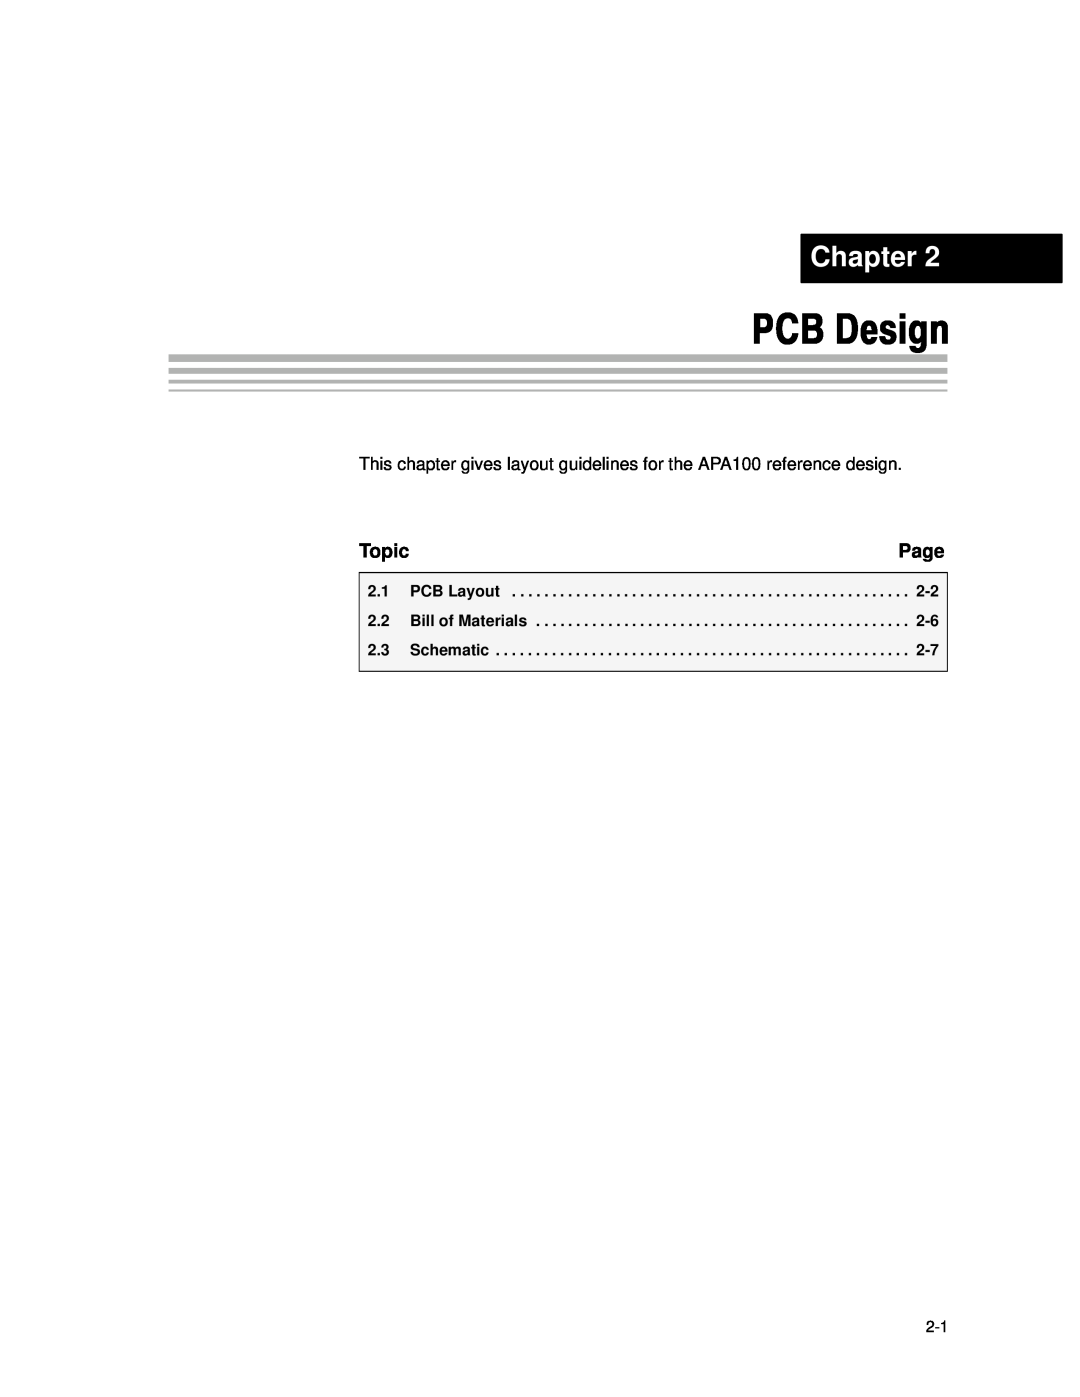 Texas Instruments APA100 manual PCB Design, Chapter, Page, Topic, PCB Layout, Bill of Materials, Schematic 